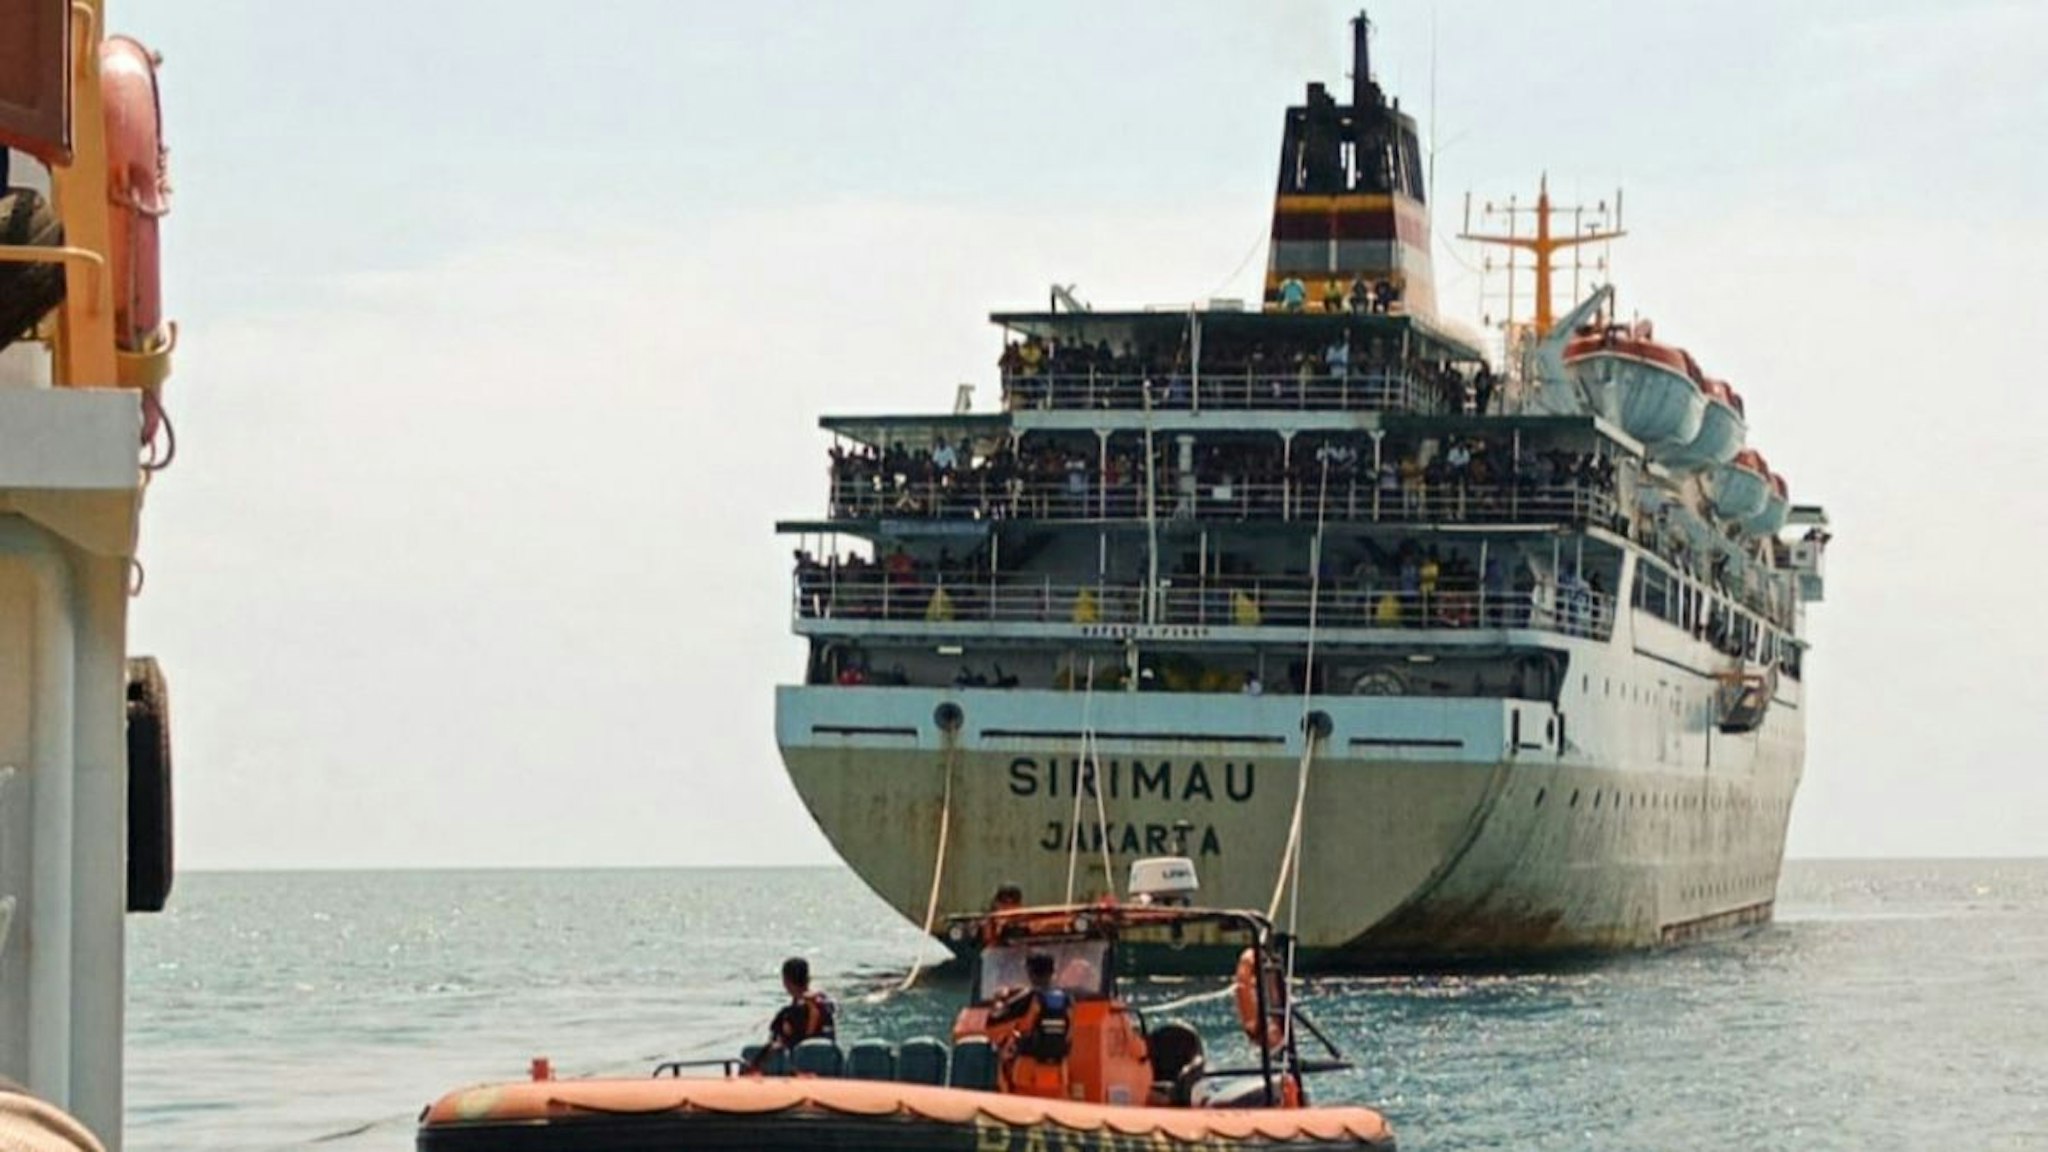 Indonesian rescuers evacuate hundreds of passengers from the KM Sirimau ferry off the coast of Lembata on May 19, 2022.